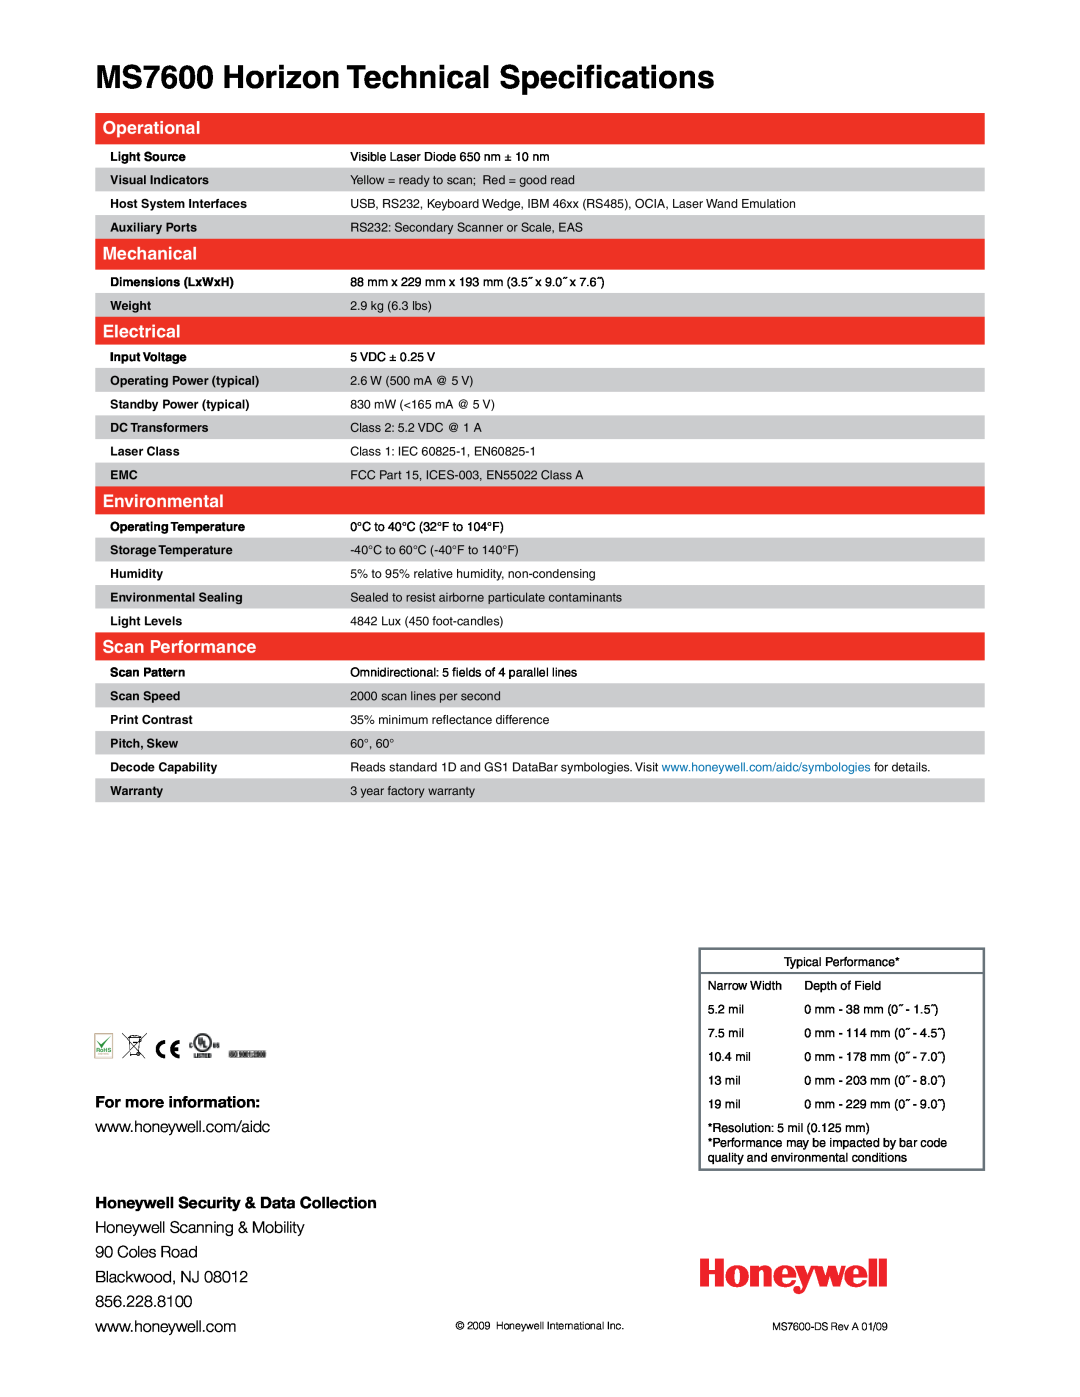 Honeywell MS7600 Horizon Technical Specifications, Operational, Mechanical, Electrical, Environmental, Scan Performance 